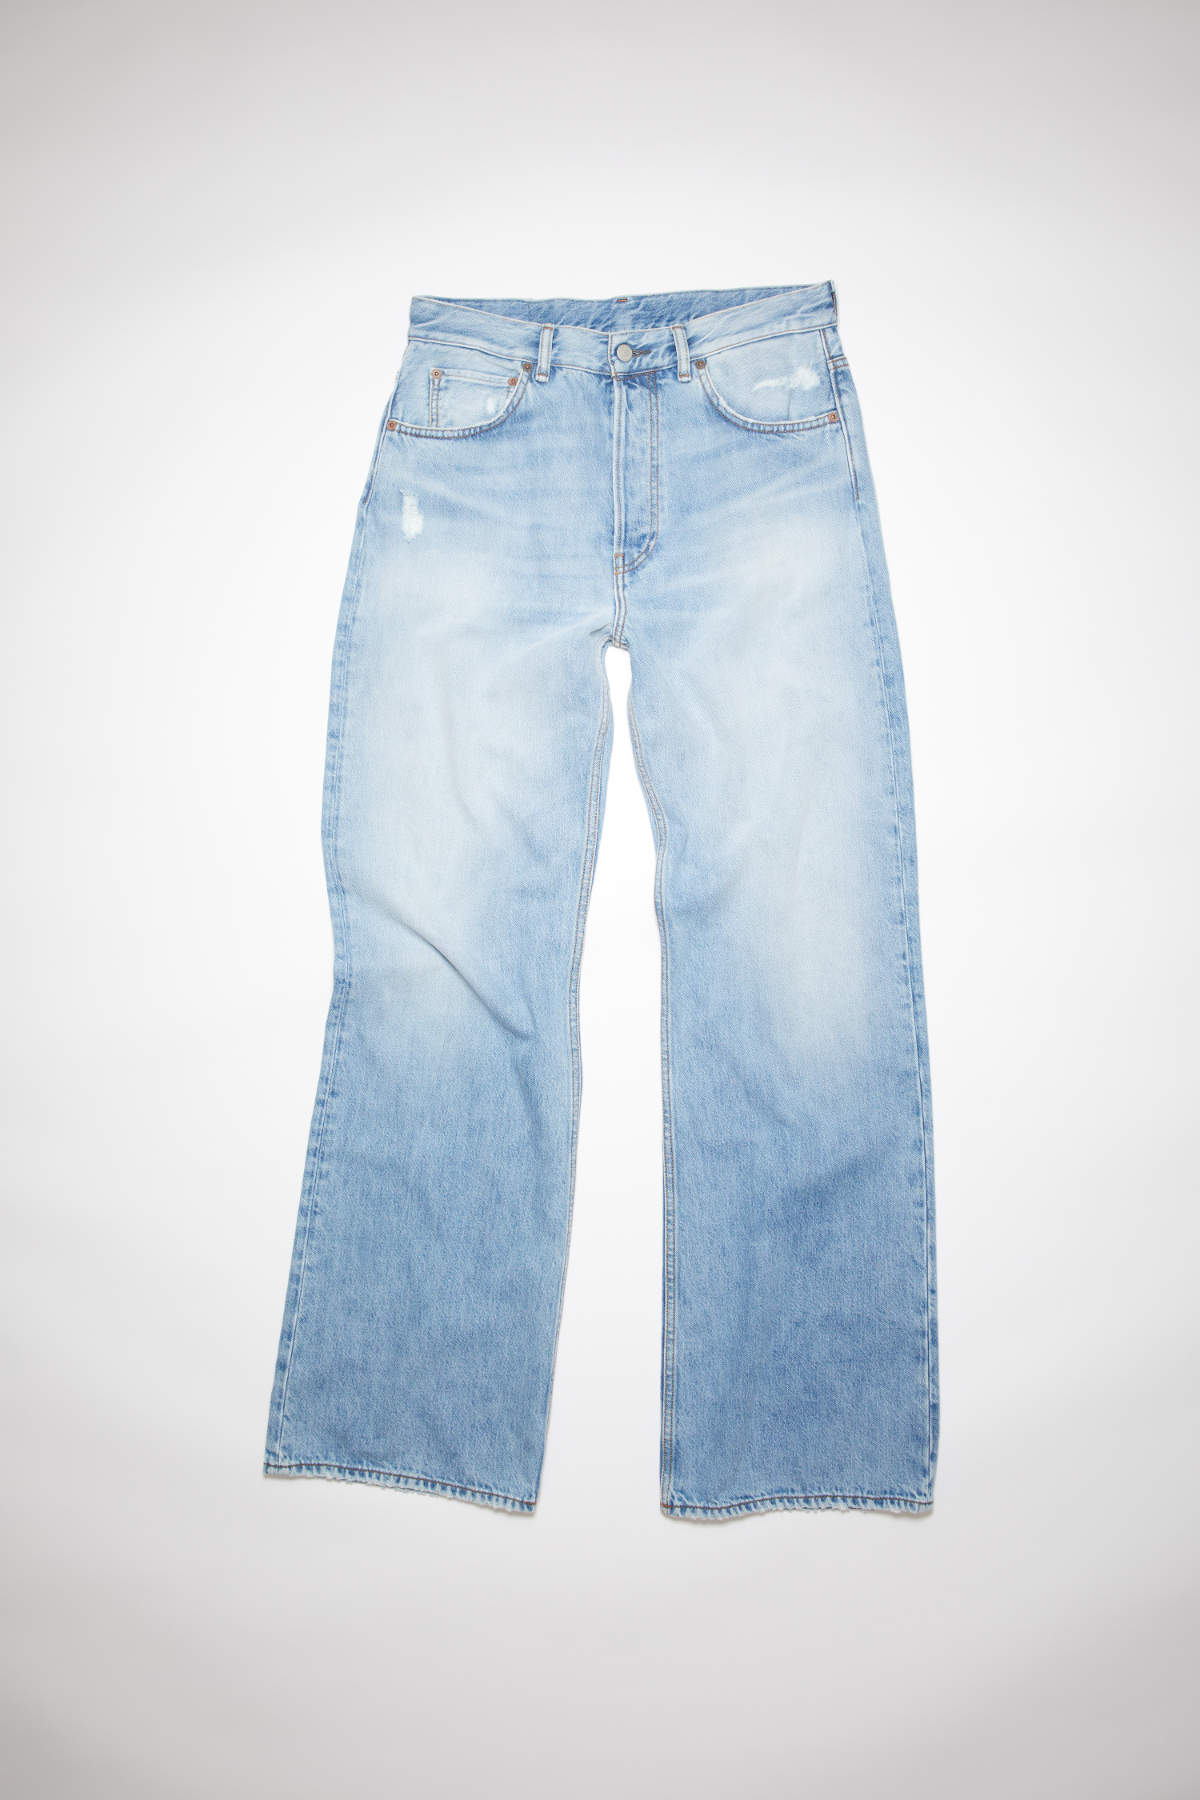 Acne Studios Introduces New Personalisation Service For Denim